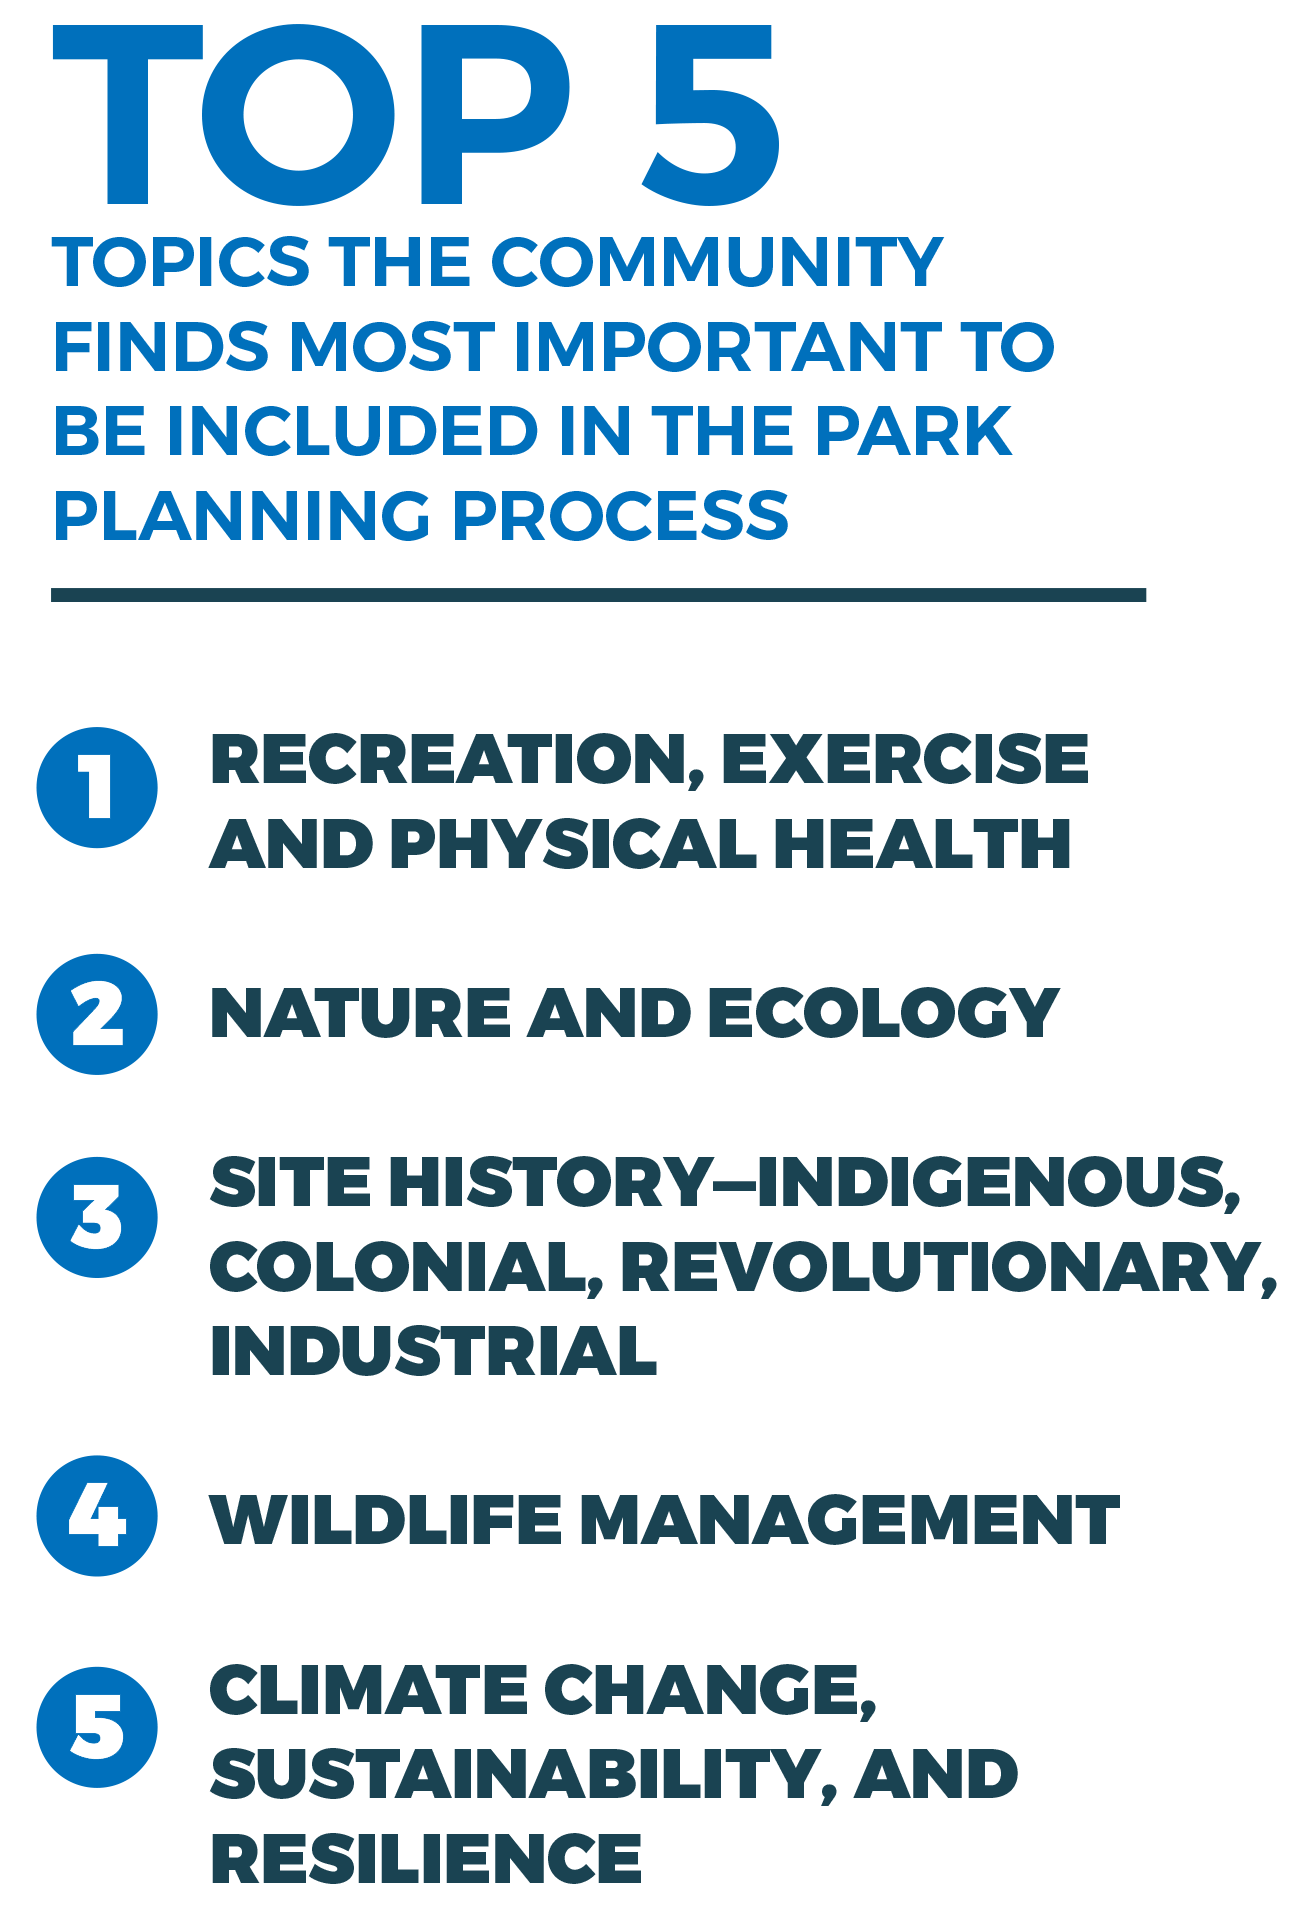 Top 5 Topics the community finds most important to be included in the park planning process